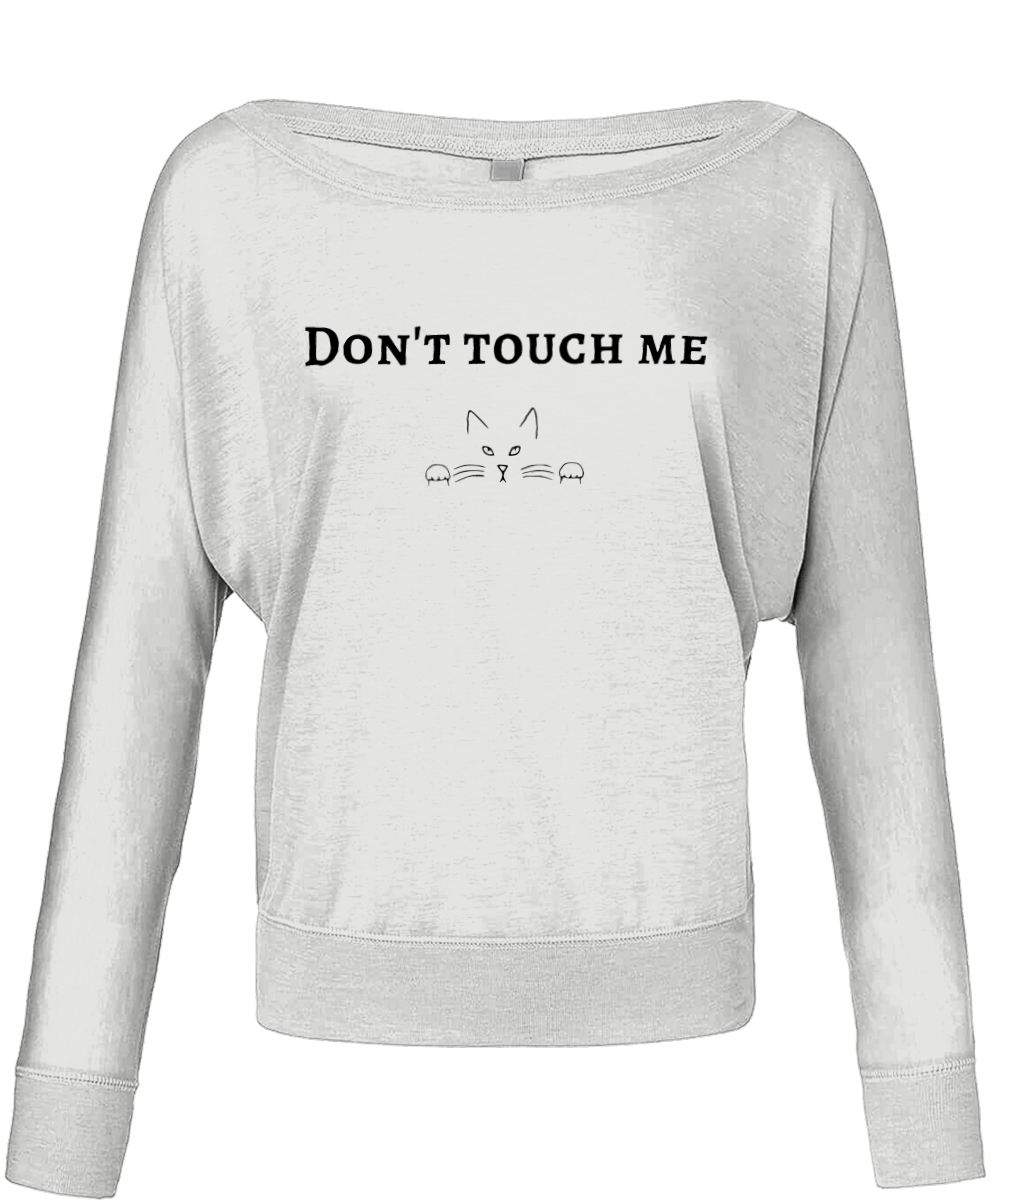 'Don't touch me' Flowy Long Sleeve T-Shirt - squishbeans